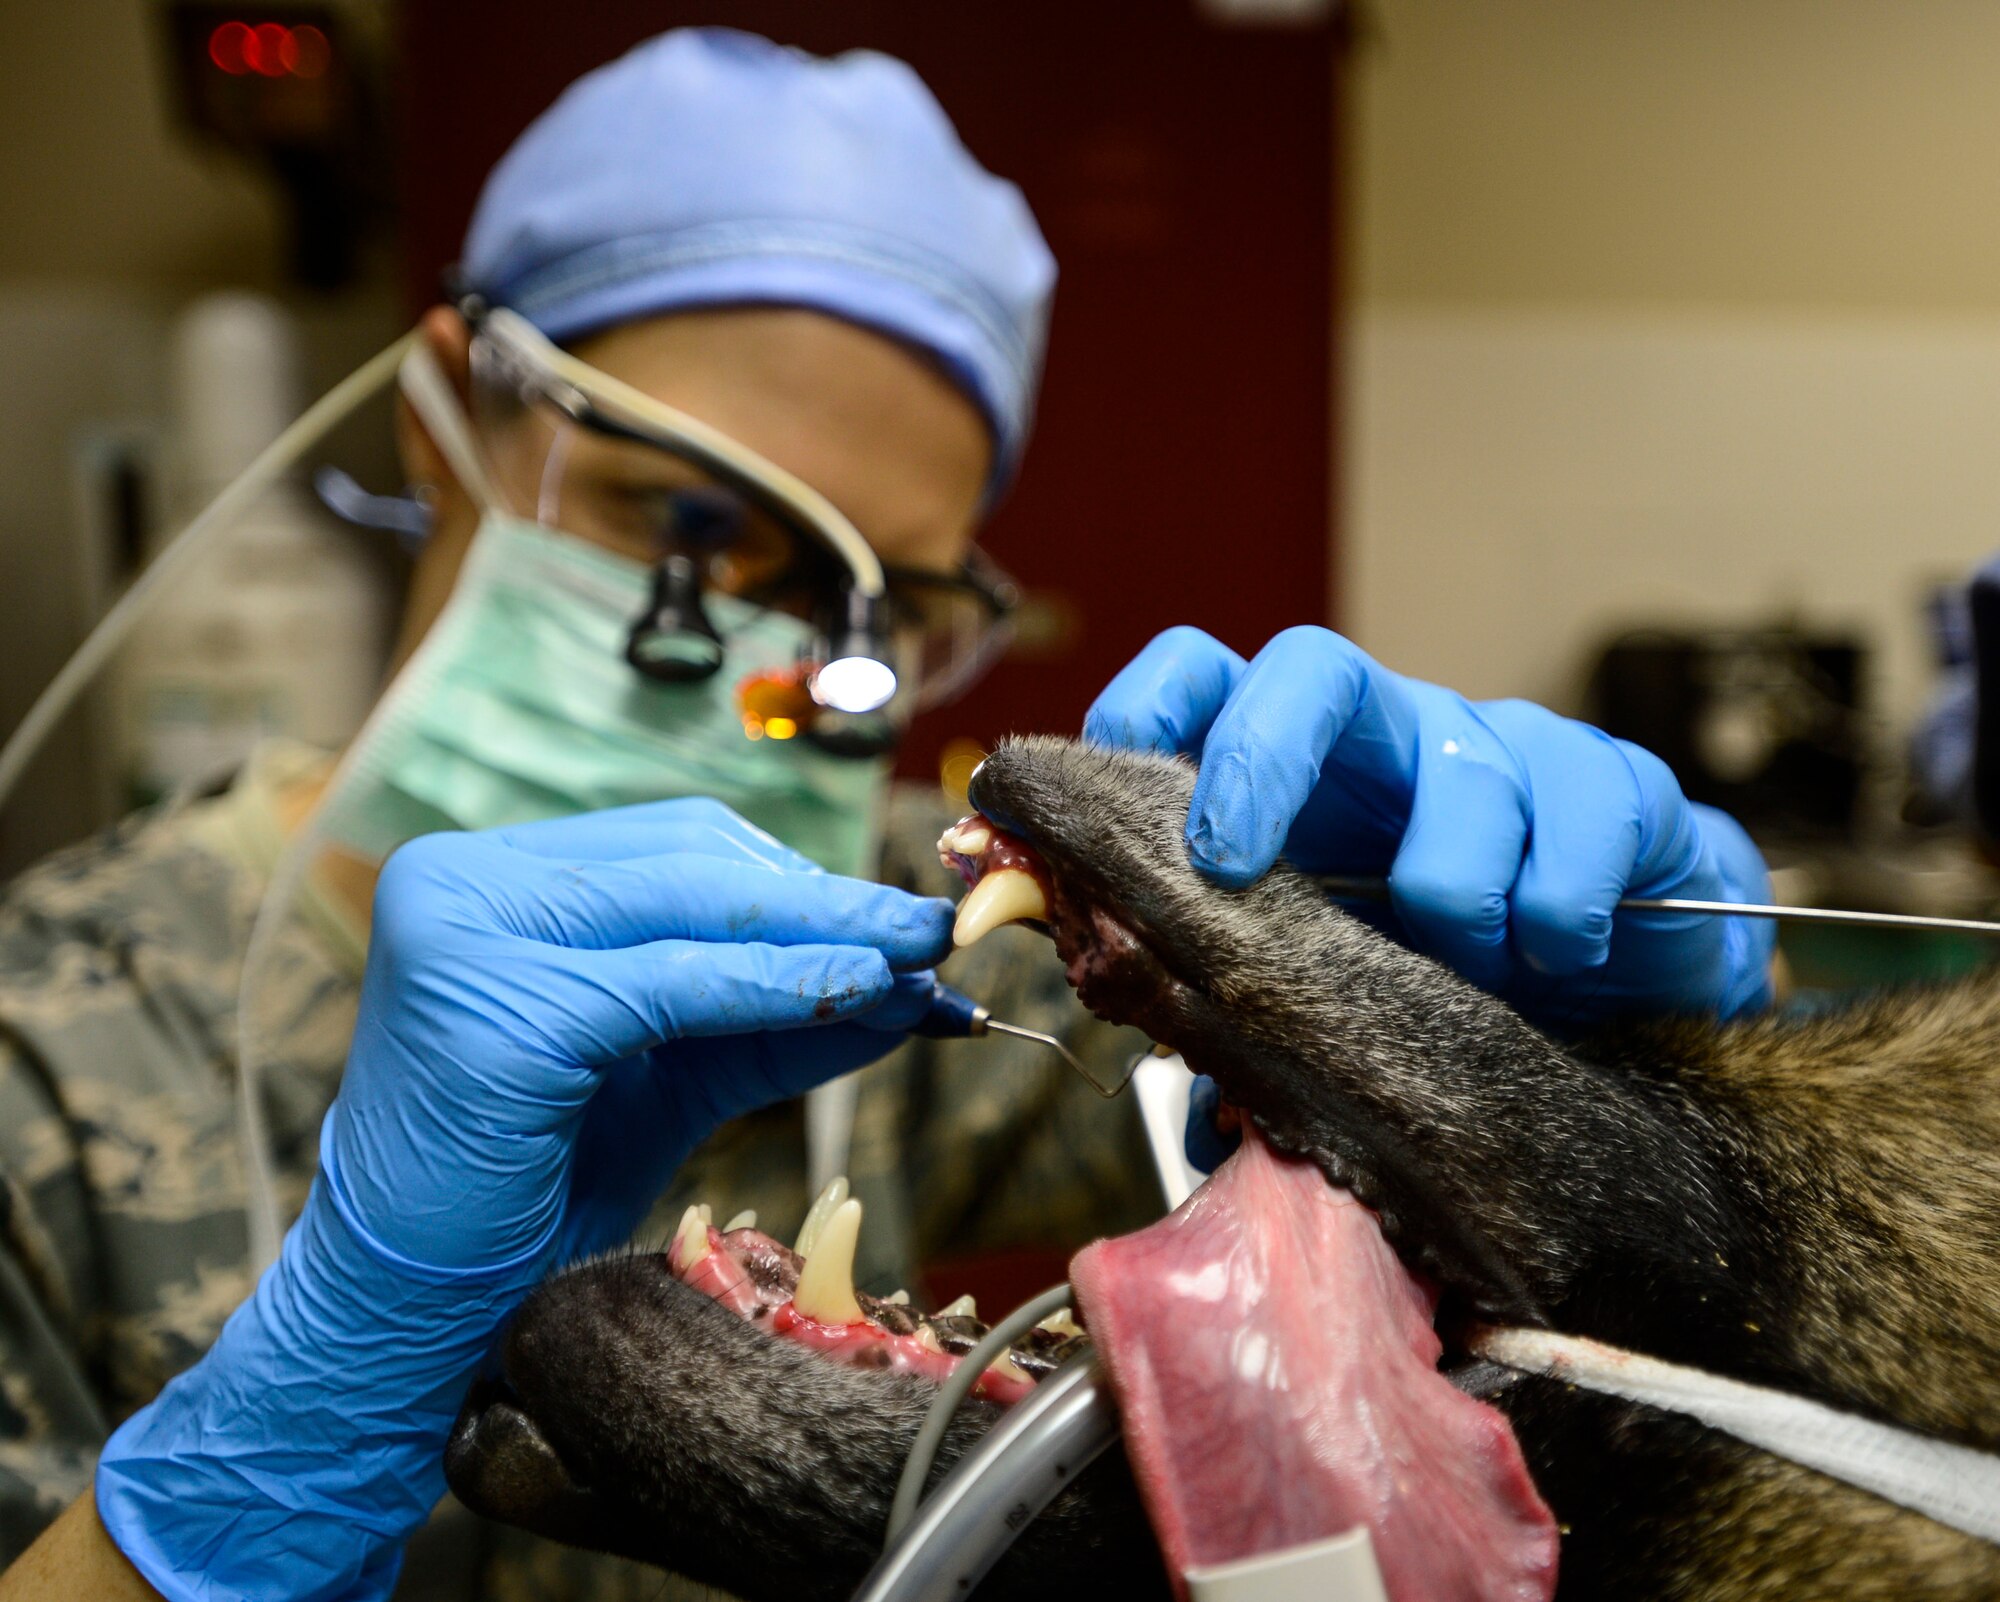 U.S. Air Force Capt. Marie Cross, 386th Expeditionary Medical Group general dentist, checks the teeth around the gum line of VVladimir, a 332nd Expeditionary Security Forces Squadron Military Working Dog, during a dental cleaning at an undisclosed location in Southwest Asia, Sept. 24, 2015. Even in a deployed environment, it is important for MWDs to receive routine dental care to prevent health issues. (U.S. Air Force photo by Senior Airman Racheal E. Watson/Released) 